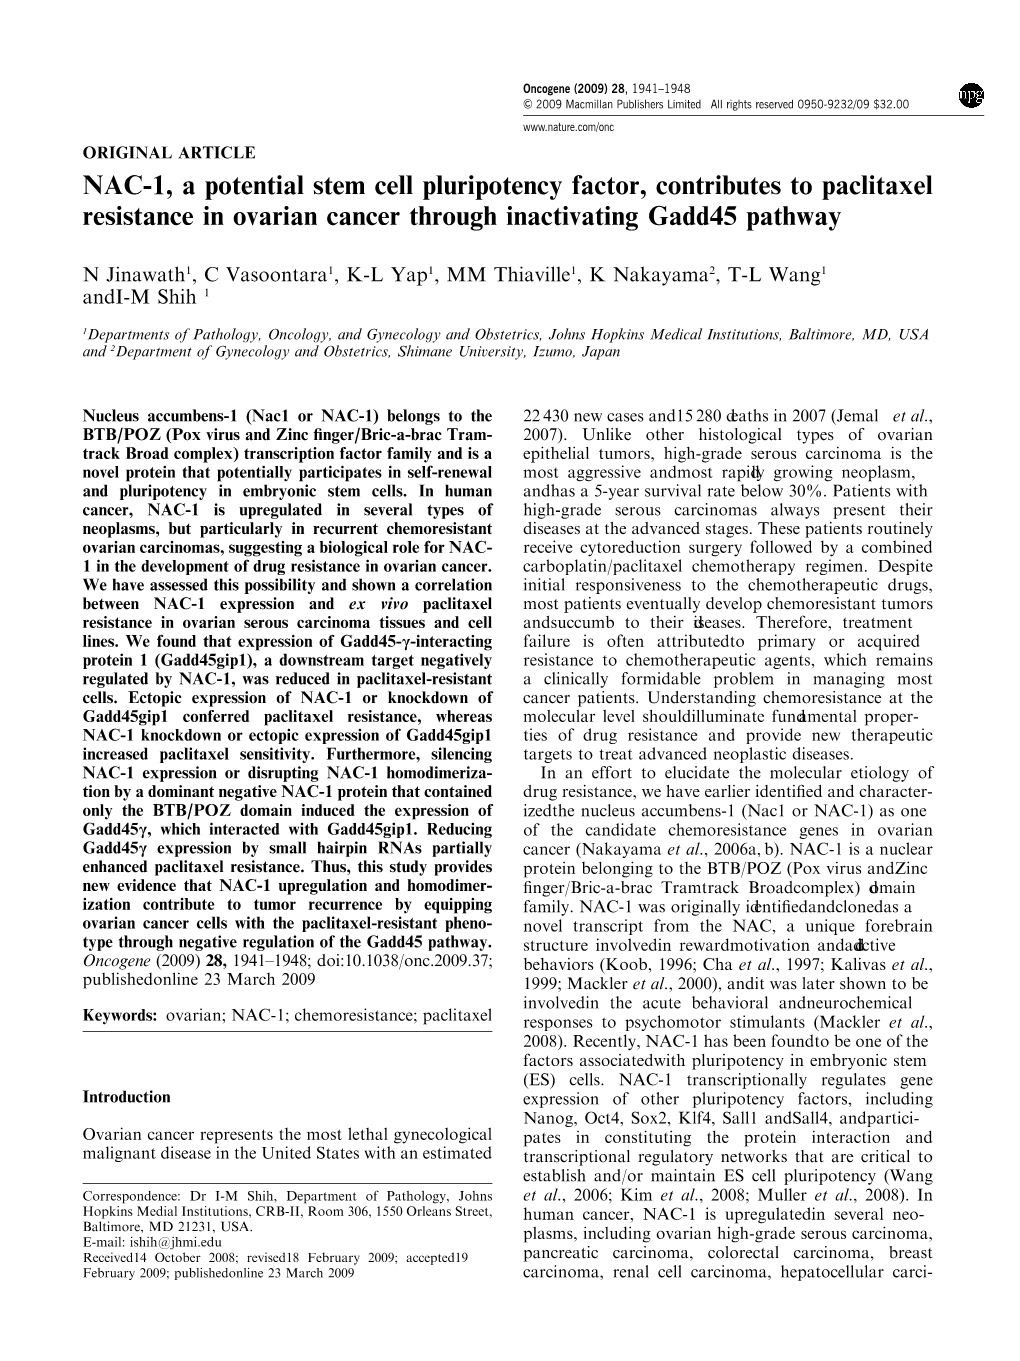 NAC-1, a Potential Stem Cell Pluripotency Factor, Contributes to Paclitaxel Resistance in Ovarian Cancer Through Inactivating Gadd45 Pathway